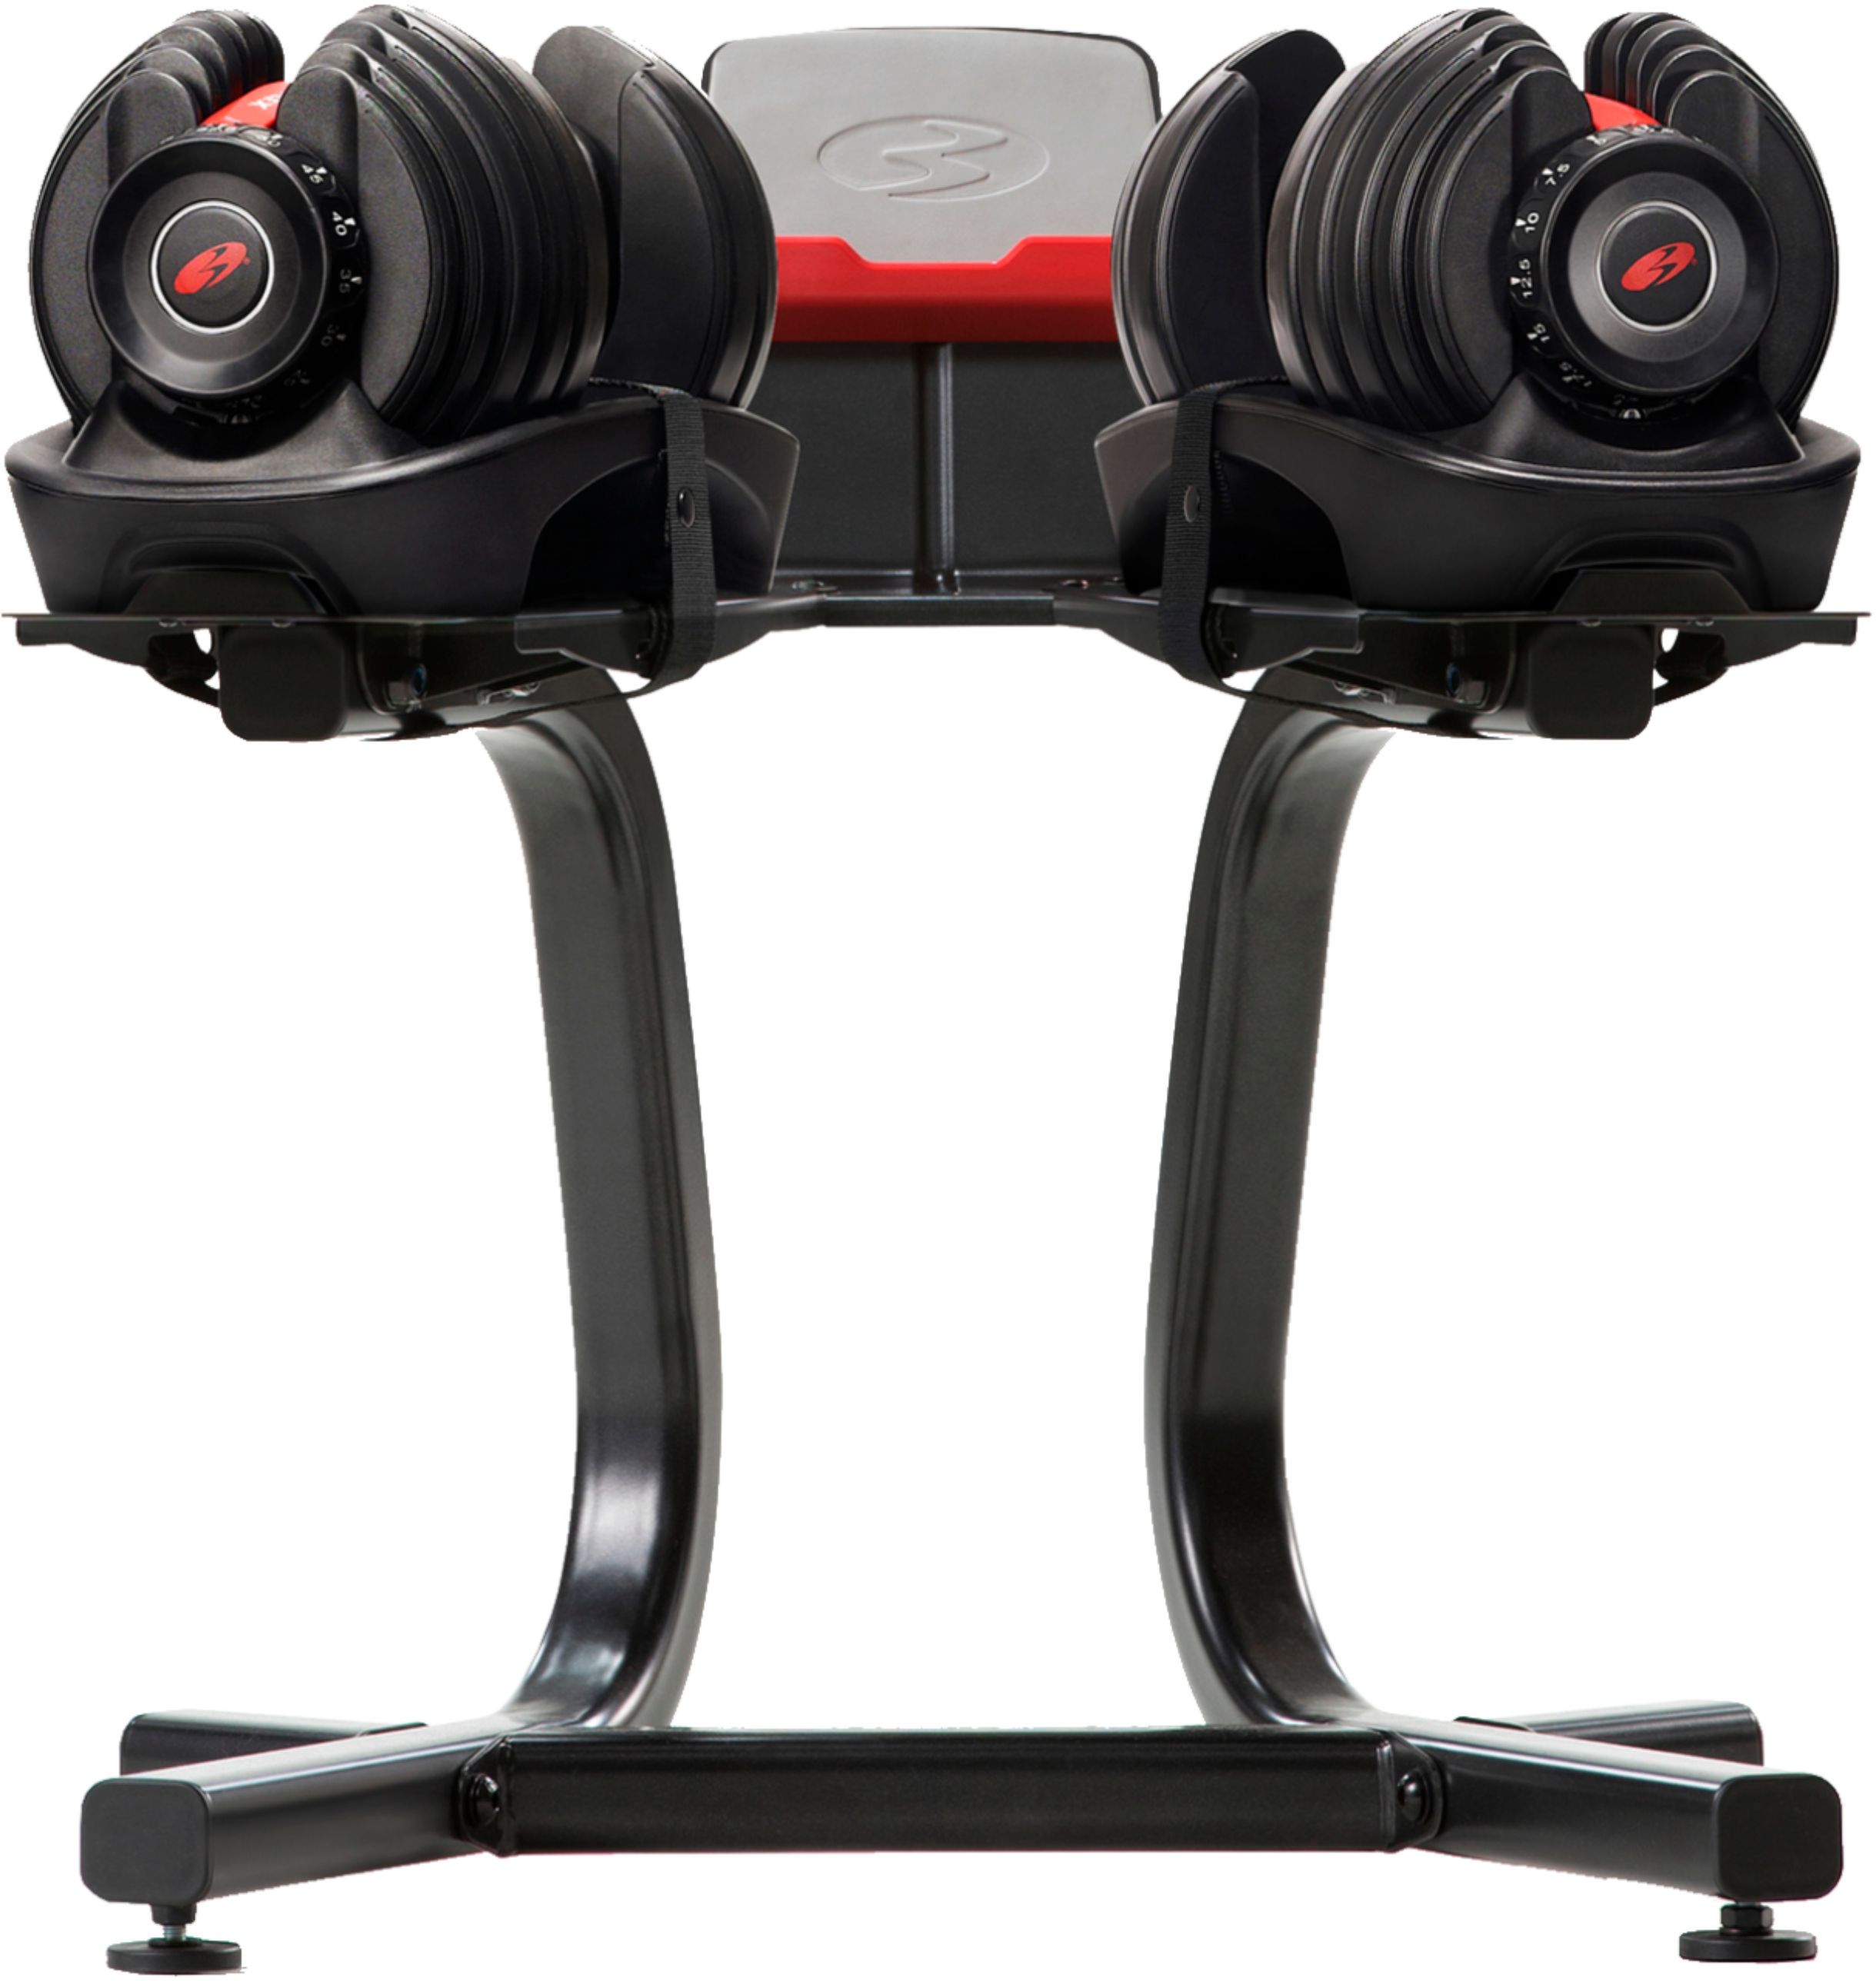 Bowflex SelectTech Dumbbell Stand w/Media Rack for 552 &1090 Stand Only